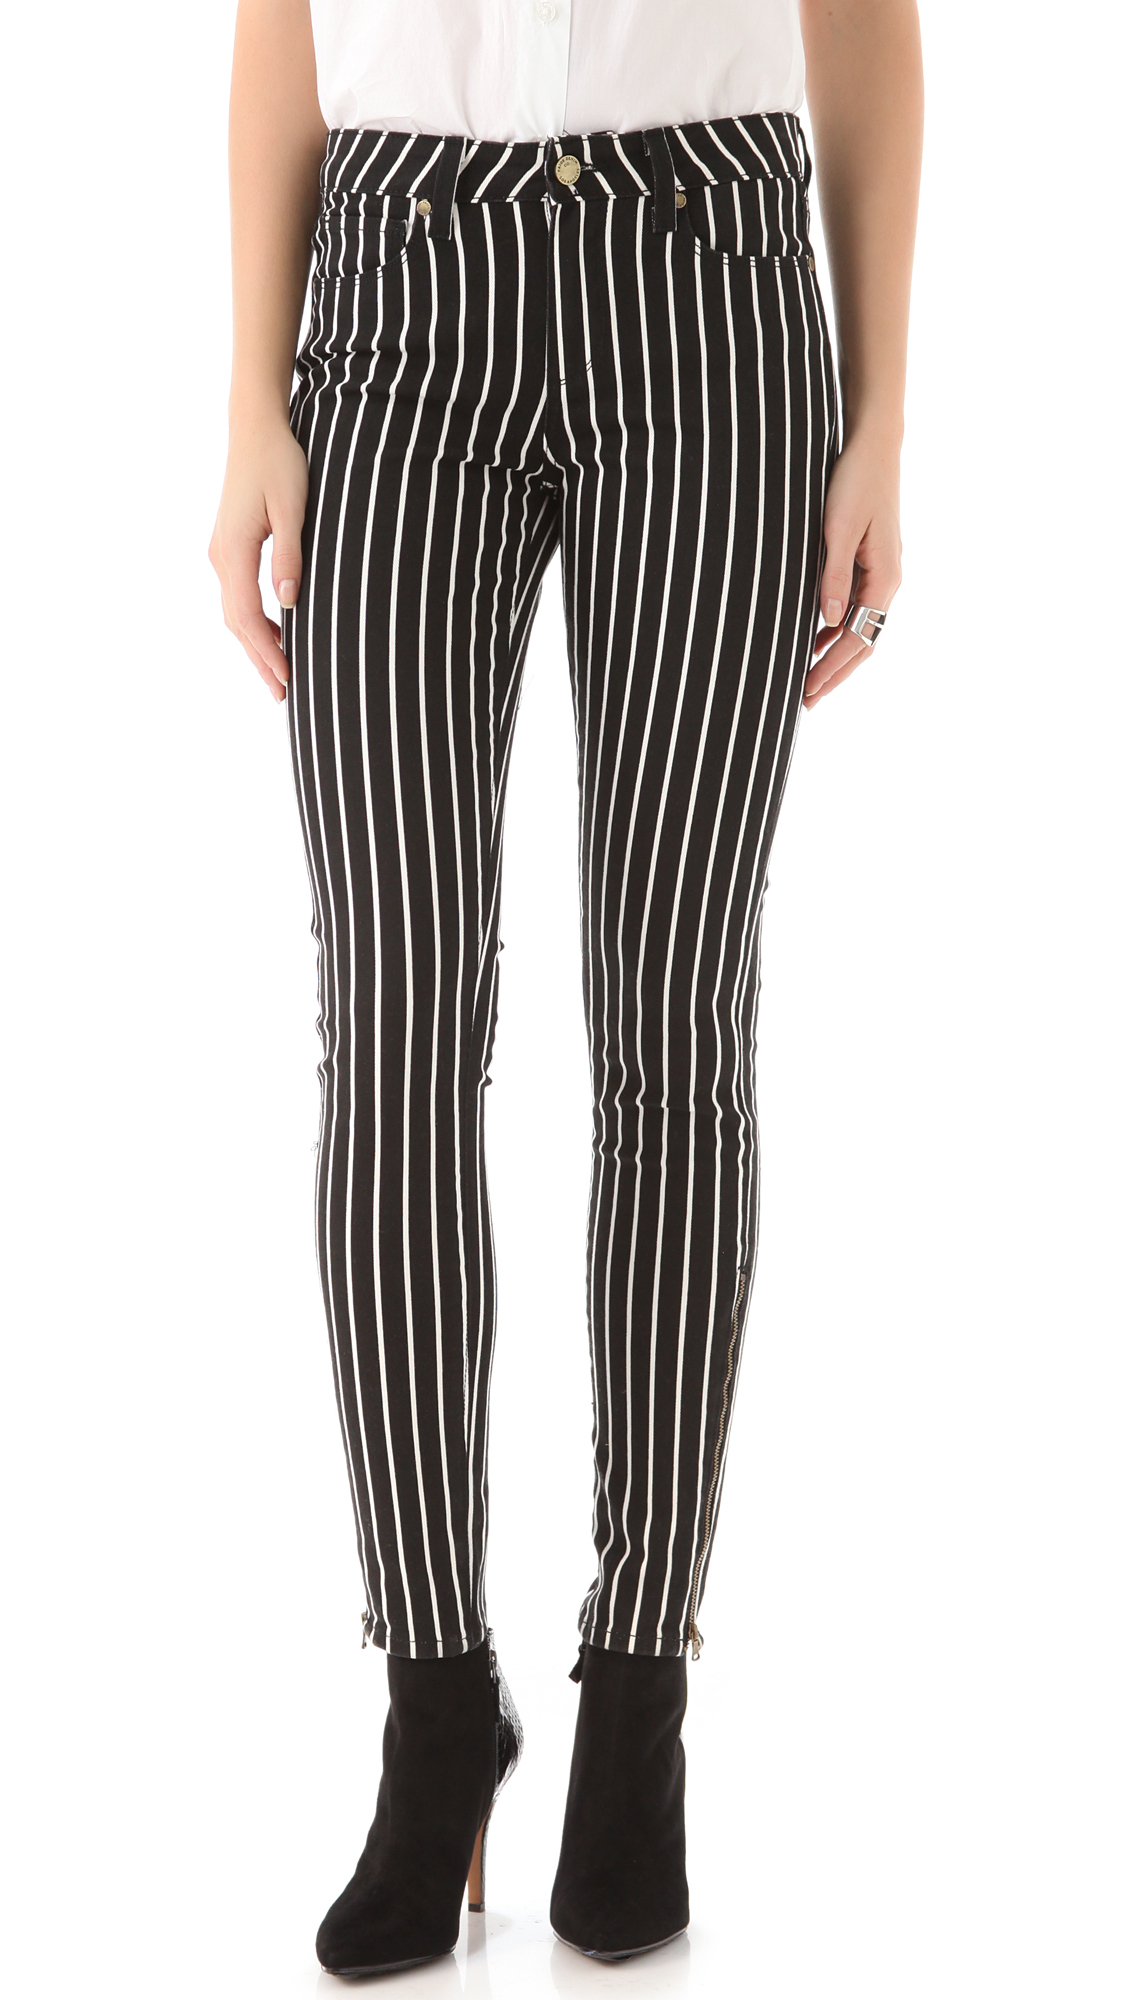 PAIGE Hoxton Striped Skinny Jeans in Black - Lyst